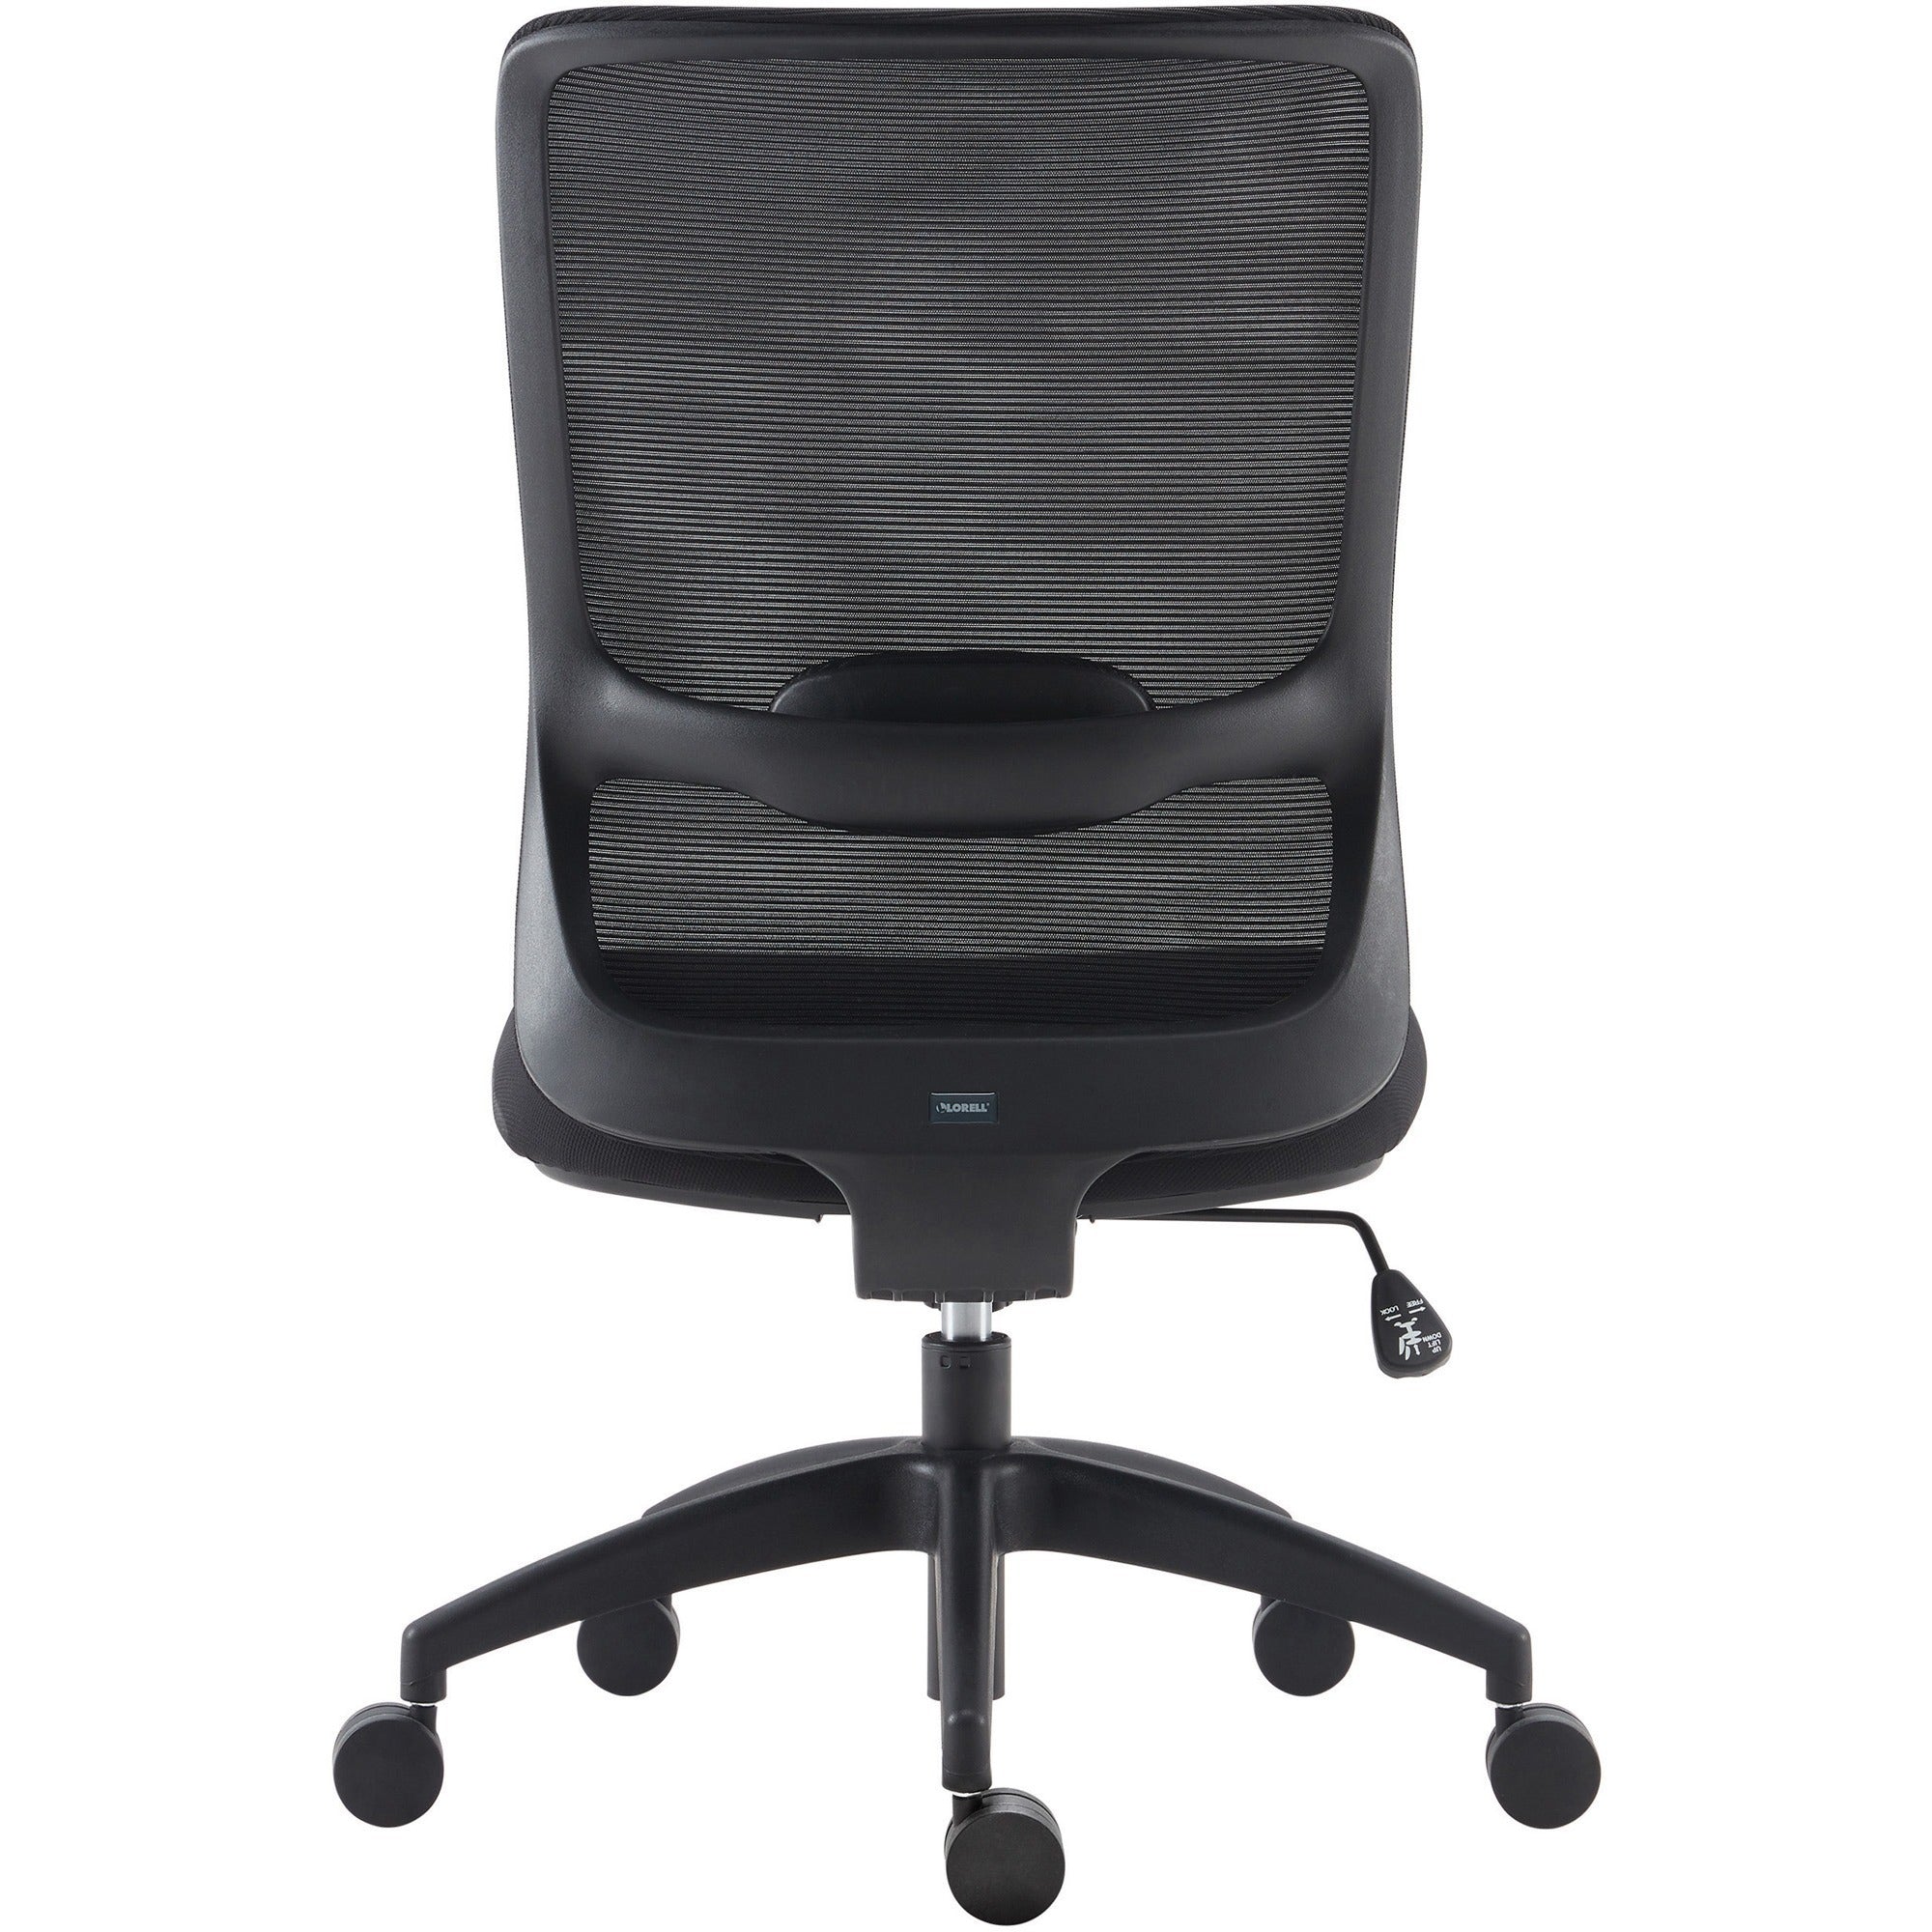 lys-soho-collection-staff-chair-fabric-seat-black-1-each_lysch200mnbk - 5